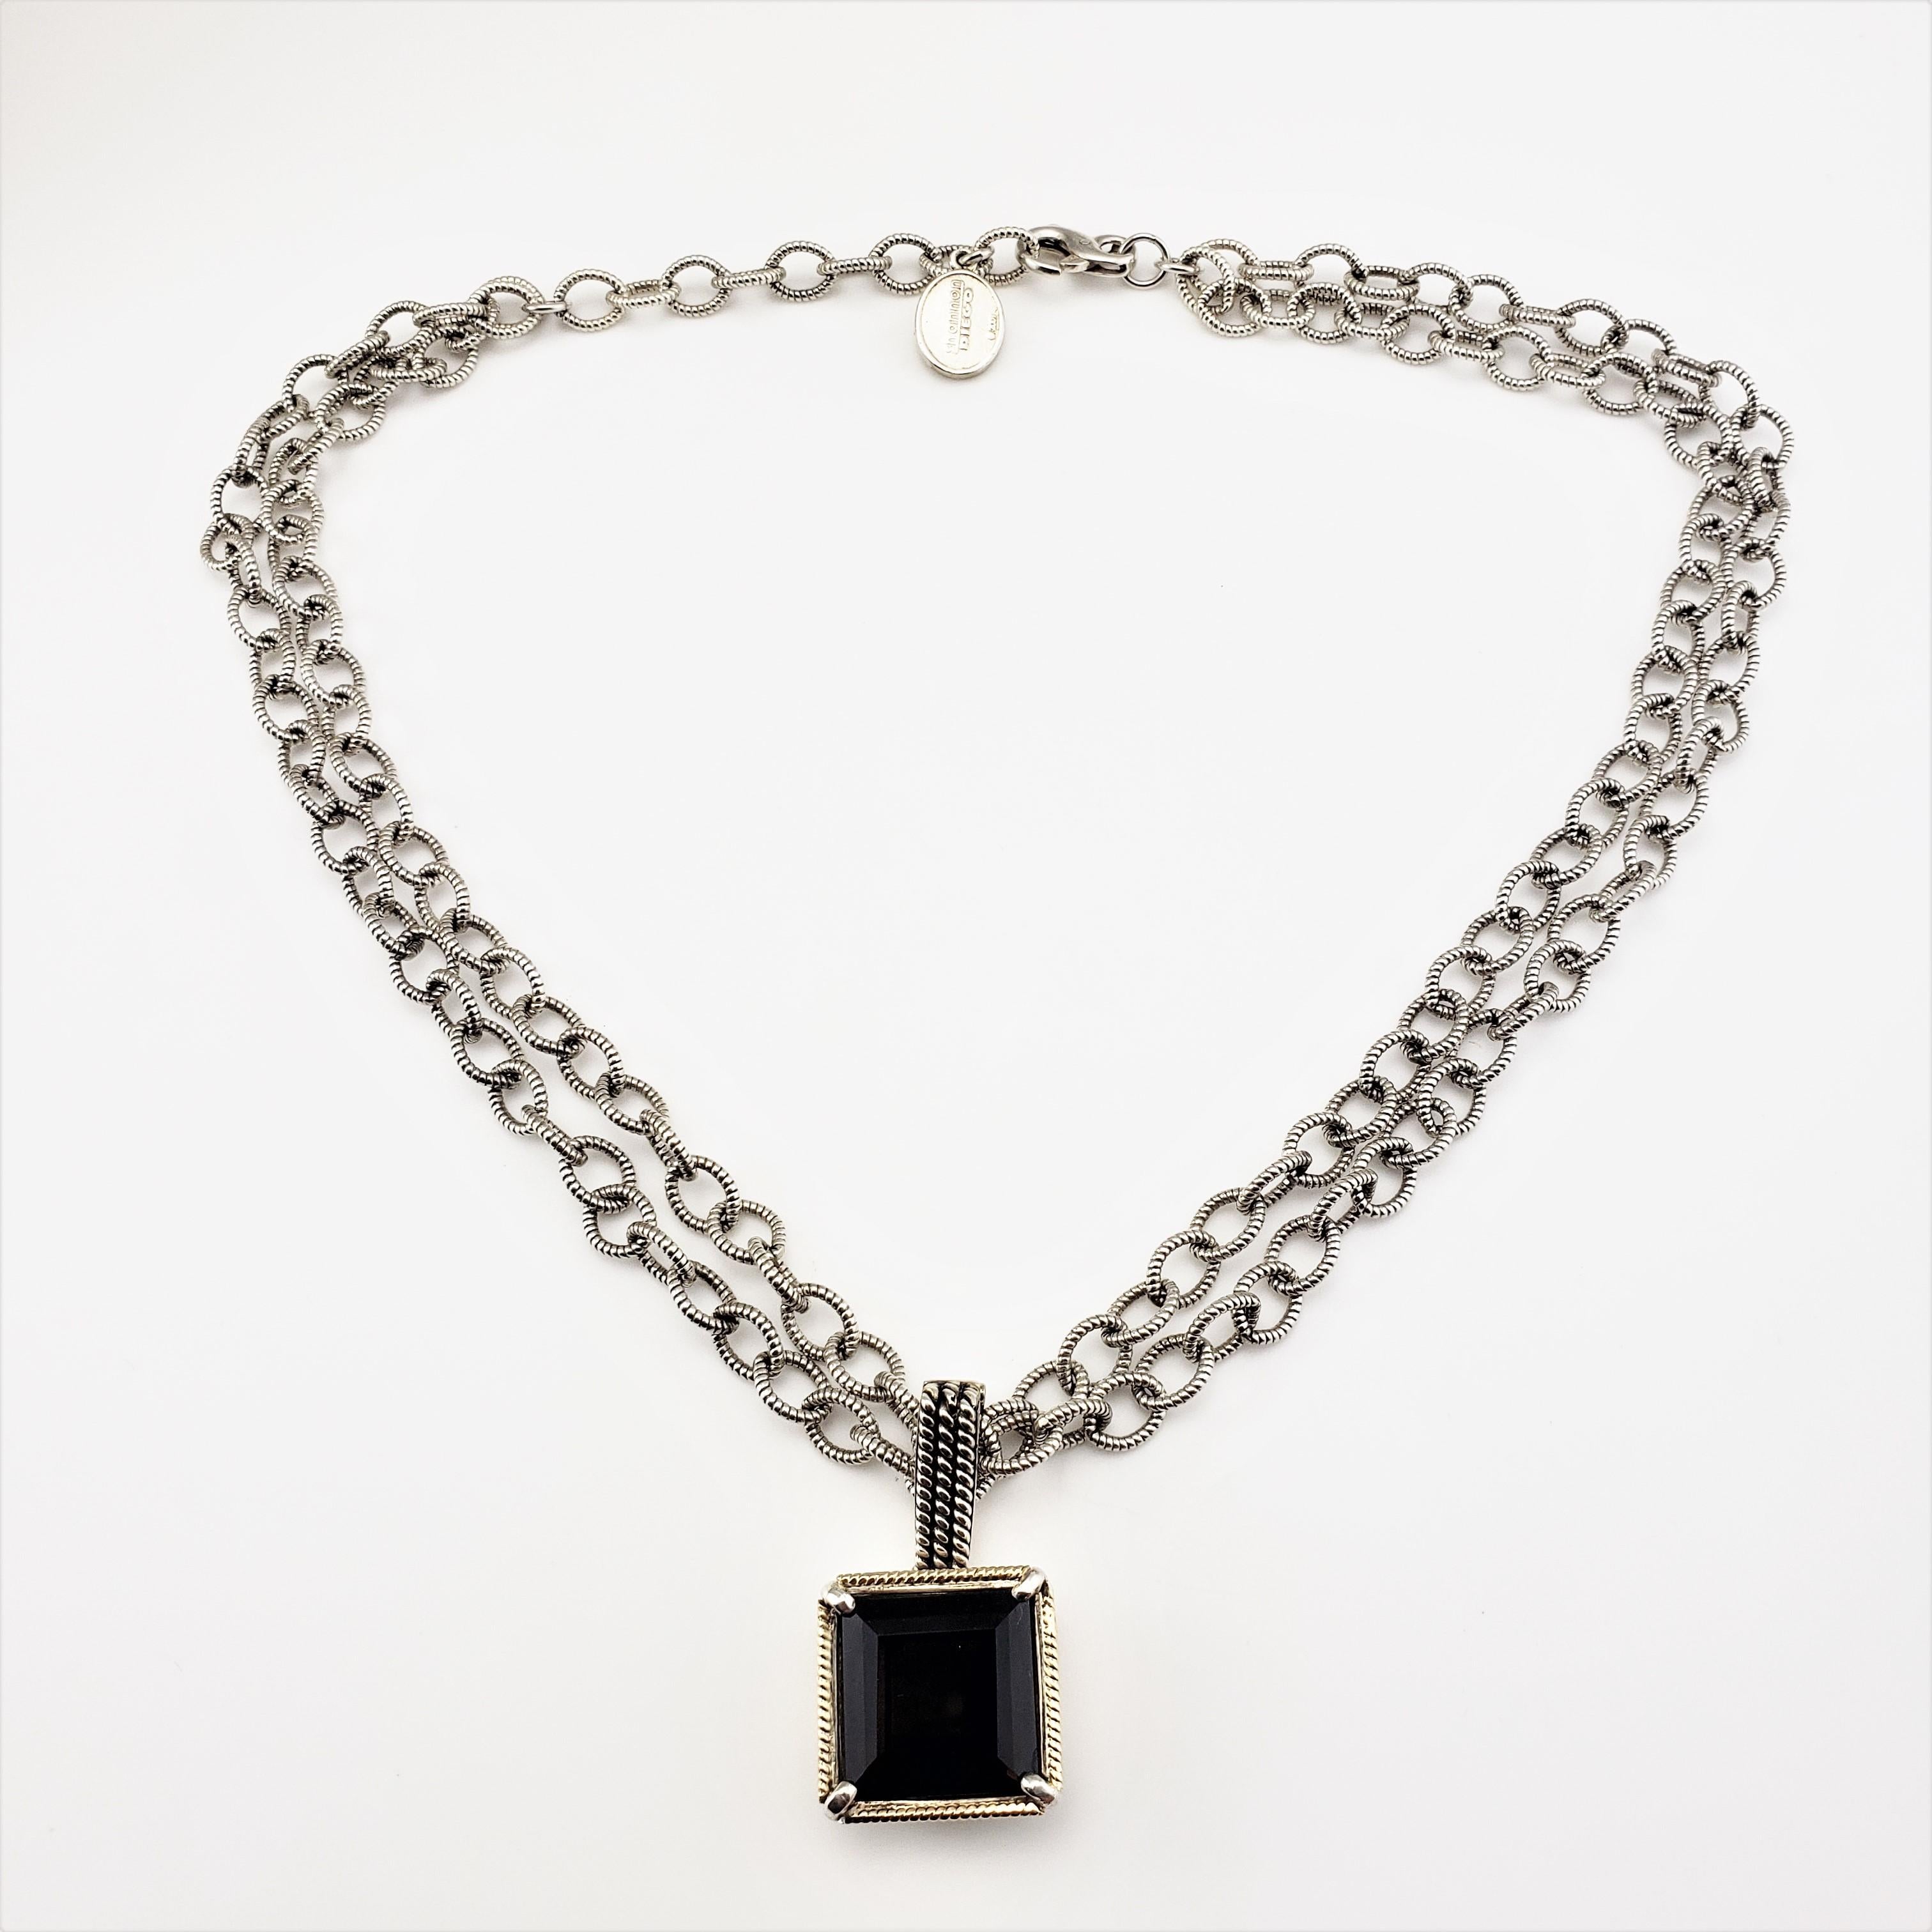 Shannon Diego 2001 Sterling Silver 14 Karat Yellow Gold Smokey Topaz Enhancer Link Necklace-

This lovely sterling silver double chain necklace features one square smokey topaz (16 mm x 16 mm) framed in 14K yellow gold.  Lobster claw closure.

Size: